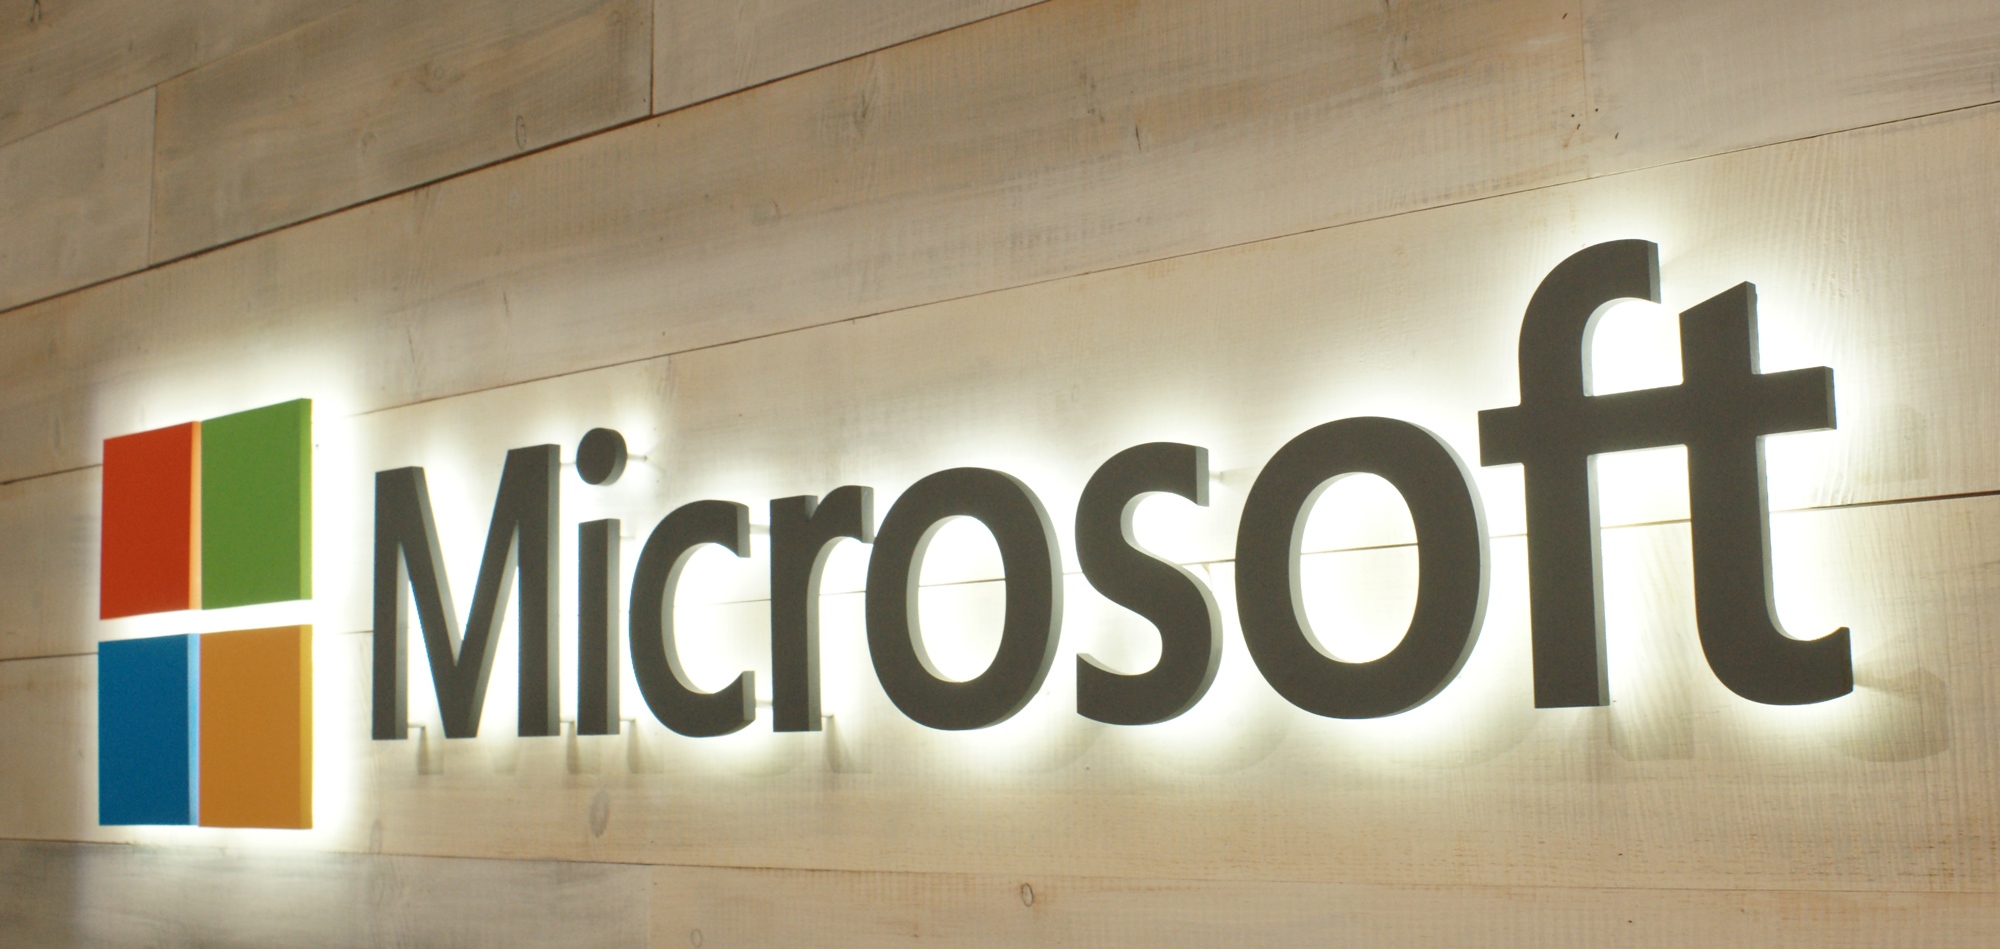 Microsoft Rolls Out BaaS Solution For Business Blockchains Deployment On Ethereum